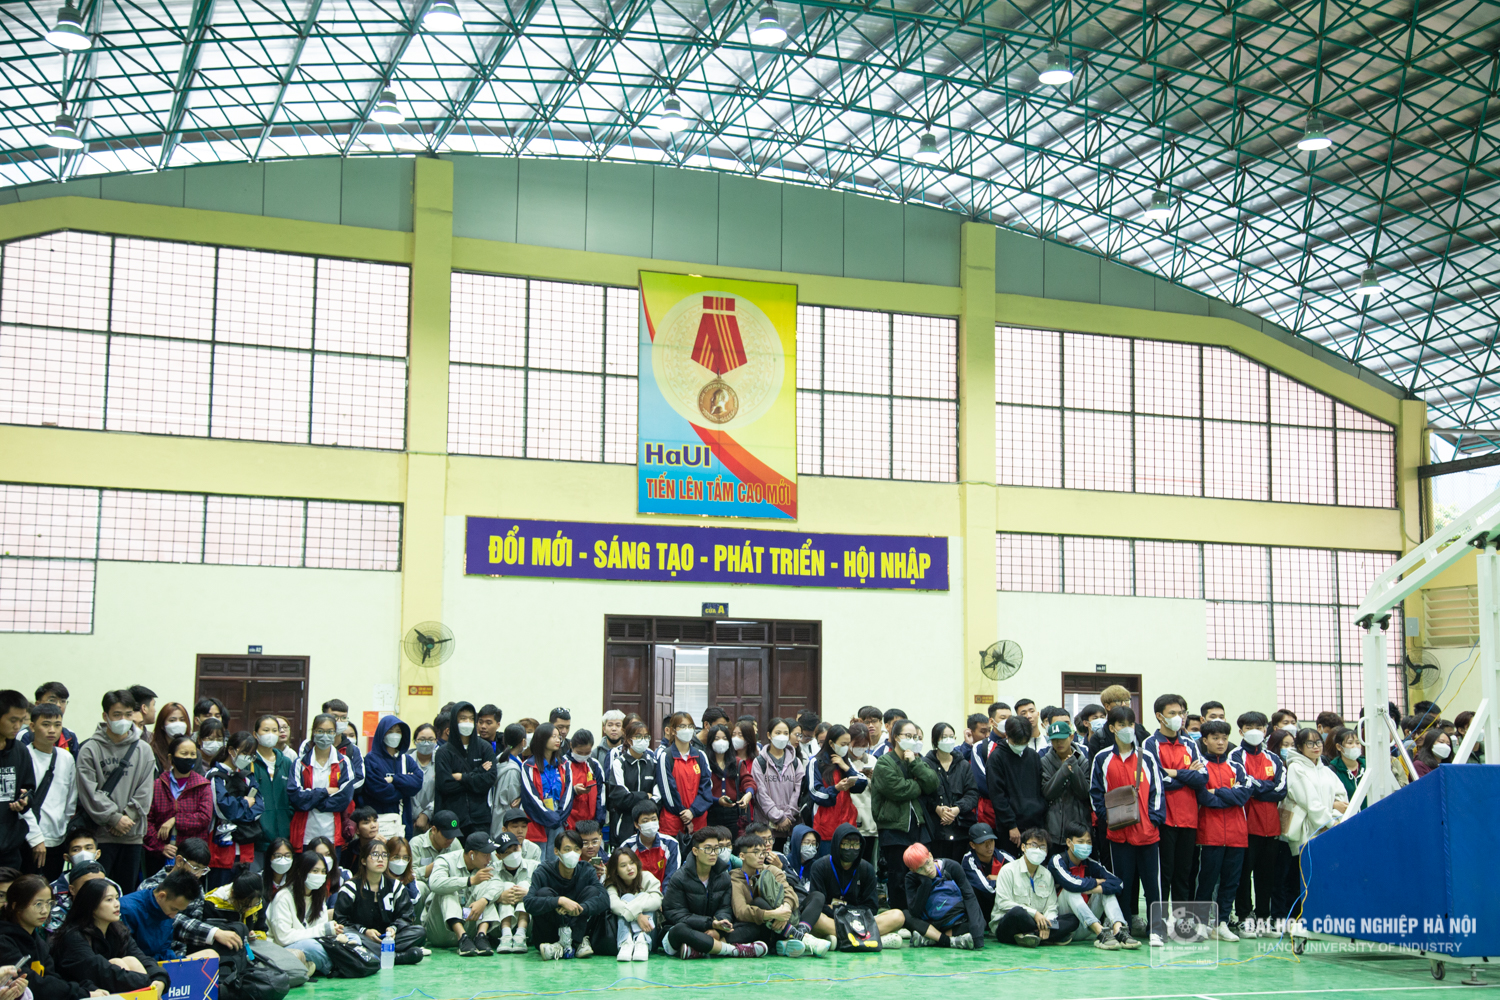 Opening ceremony of The National University Championship basketball tournament in 2022, Northern region took place at Hanoi University of Industry